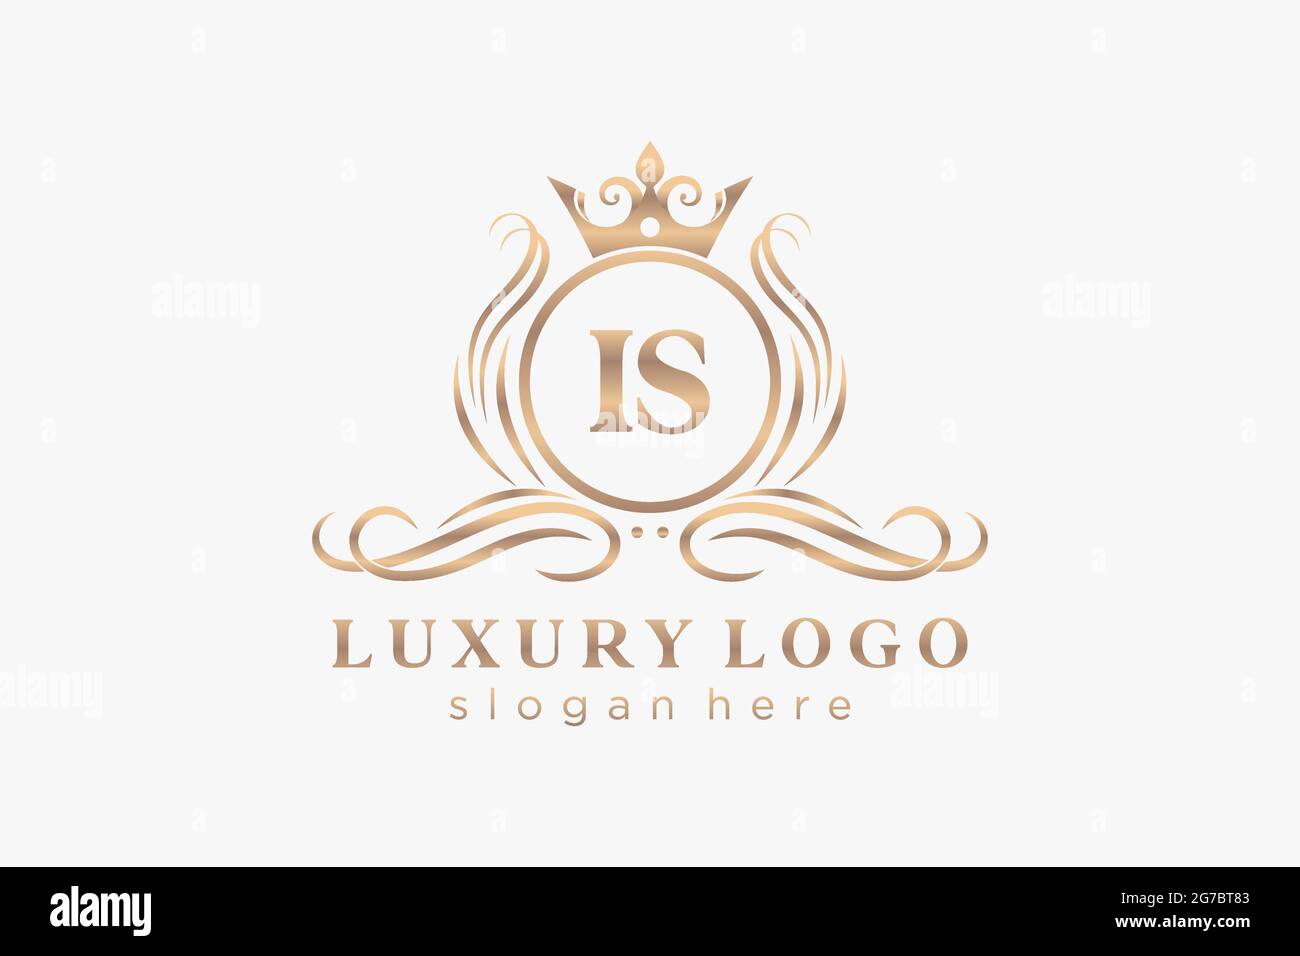 IS Letter Royal Luxury Logo template in vector art for Restaurant, Royalty, Boutique, Cafe, Hotel, Heraldic, Jewelry, Fashion and other vector illustr Stock Vector